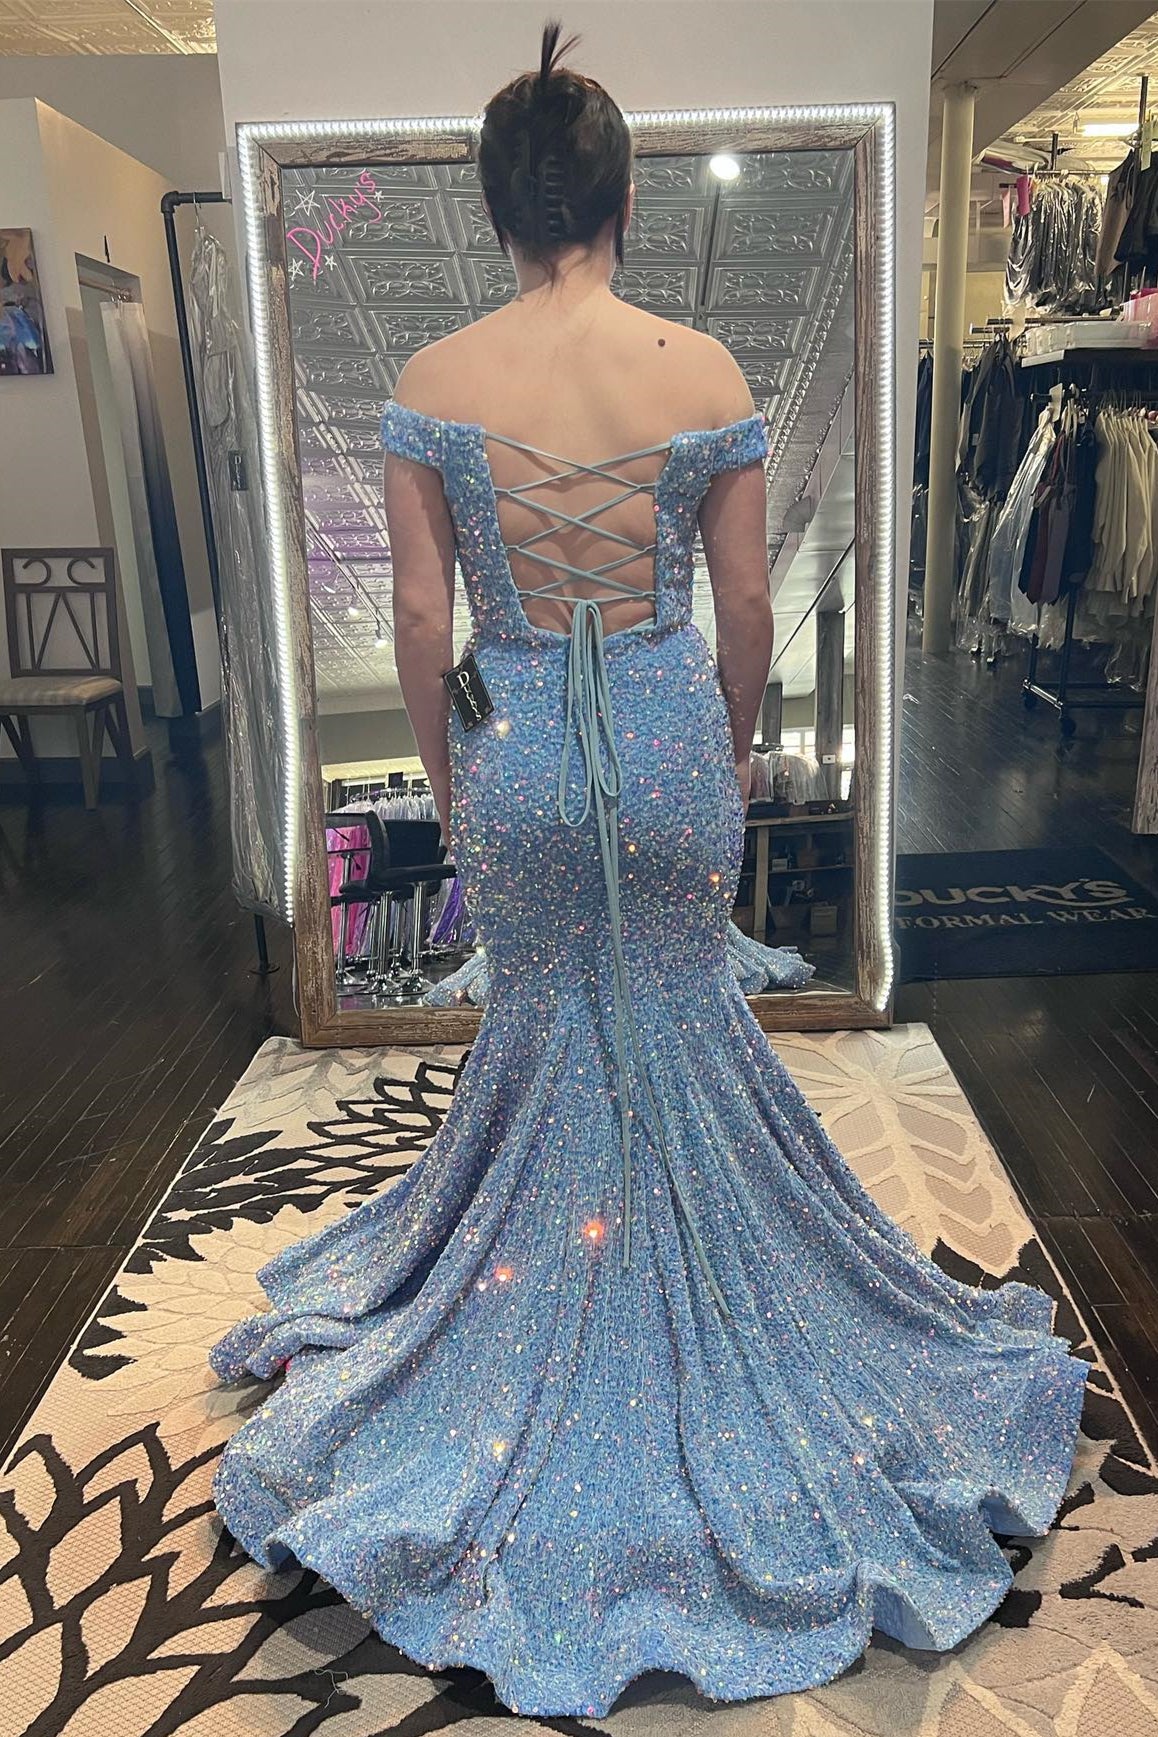 Mist Mermaid Off-the-Shoulder Lace-Up Back Sequins Sweeping Long Prom Dress